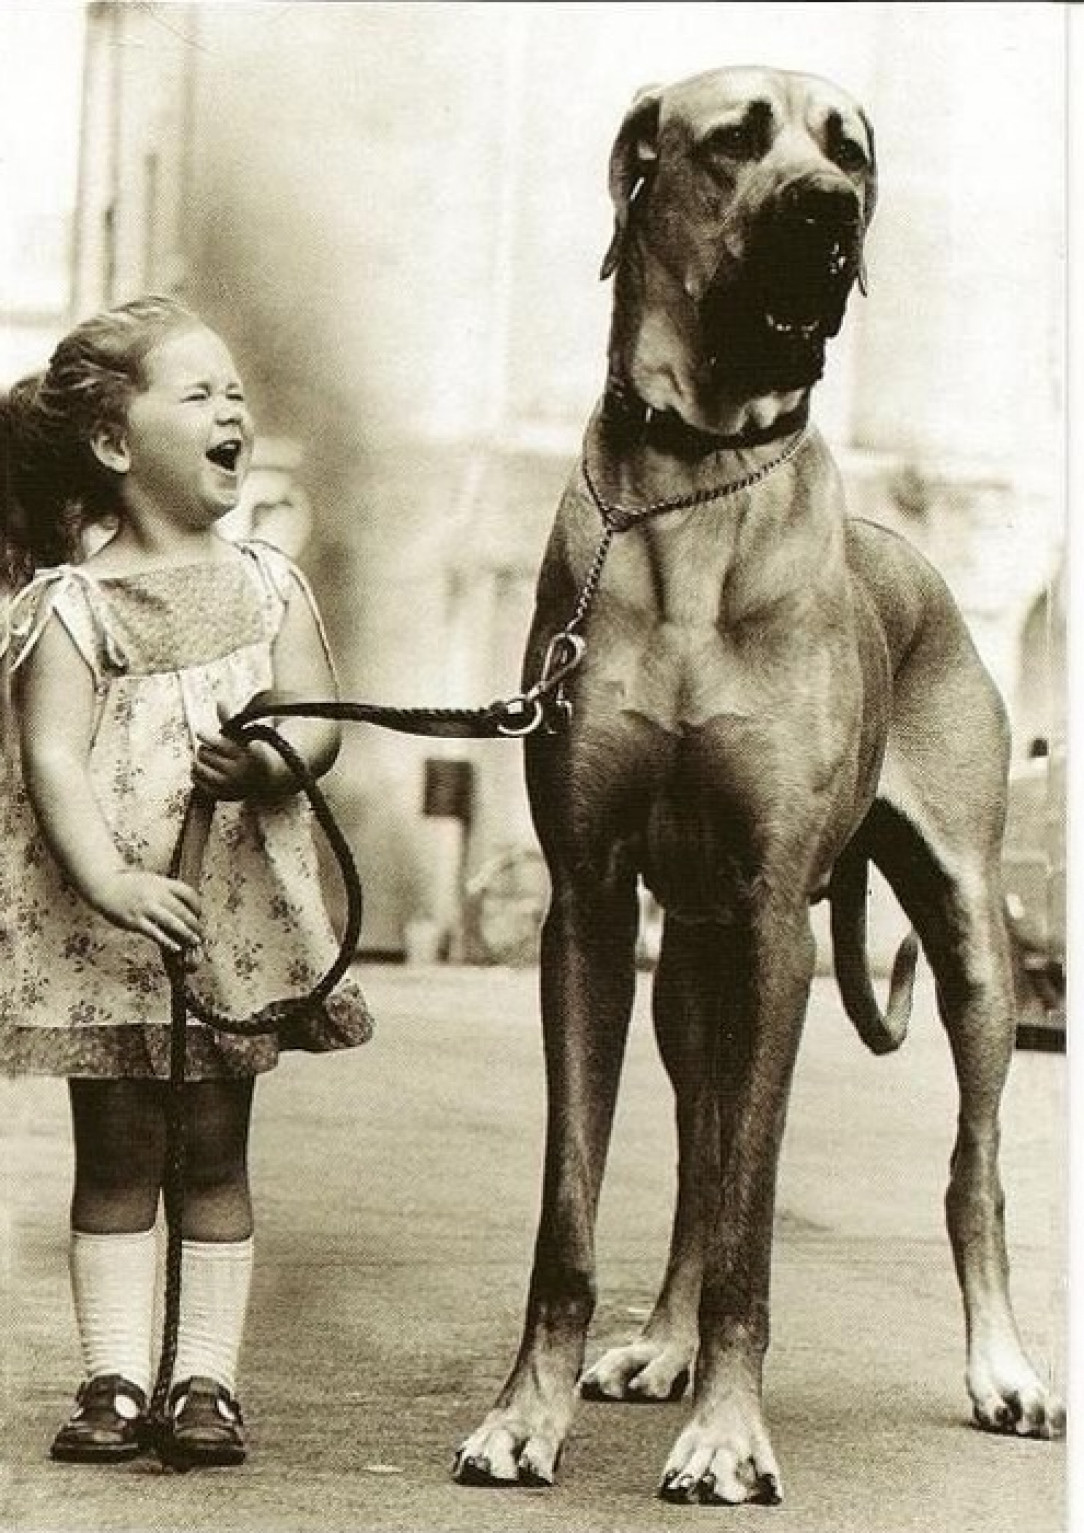 Enormously happy little girl with enormous dog, 1950s